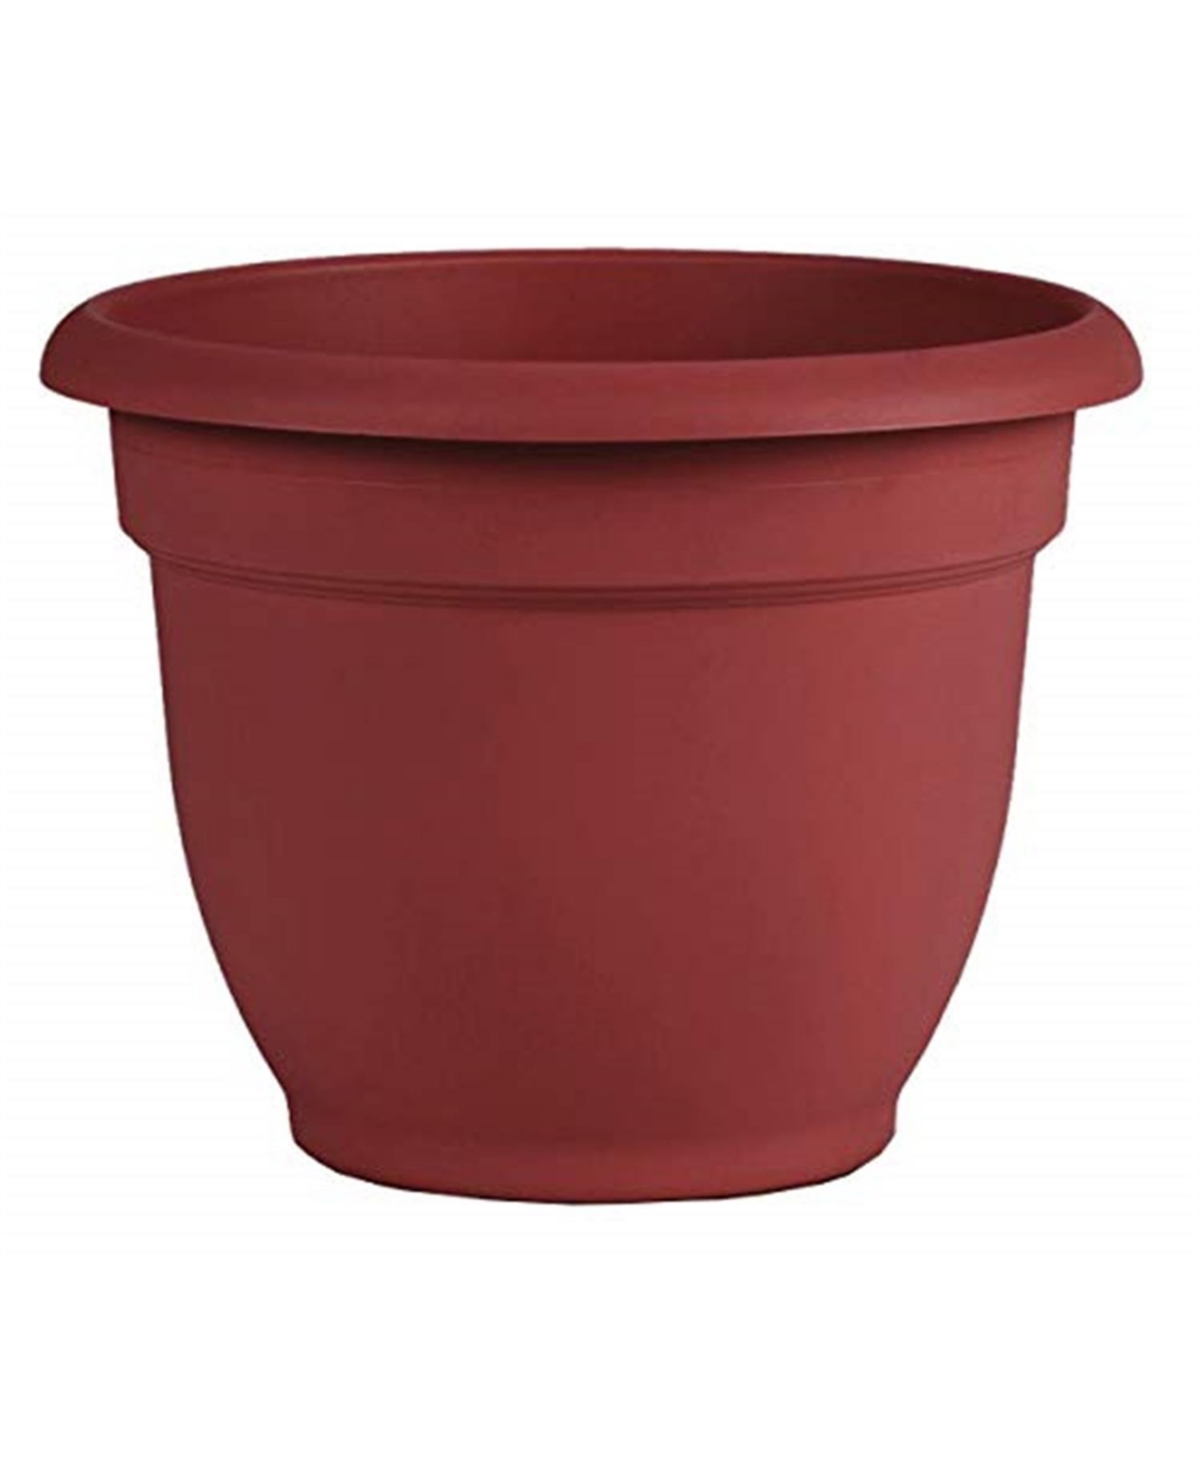 AP1213 Ariana Planter with Self-Watering Disk, Burnt Red - 12 inches - Red